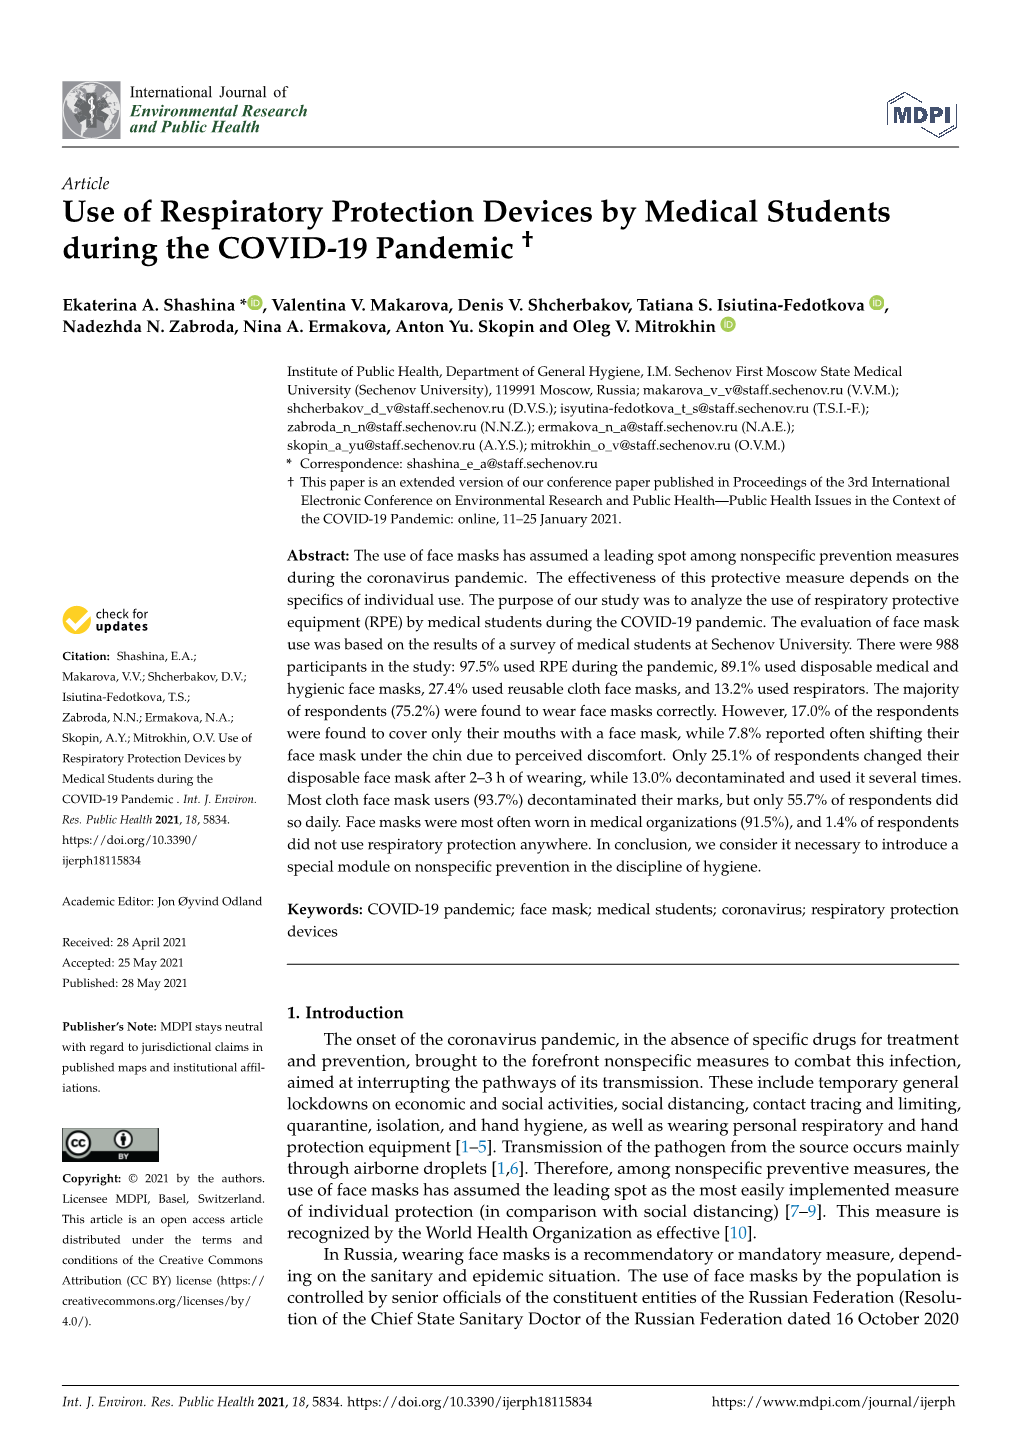 Use of Respiratory Protection Devices by Medical Students During the COVID-19 Pandemic †